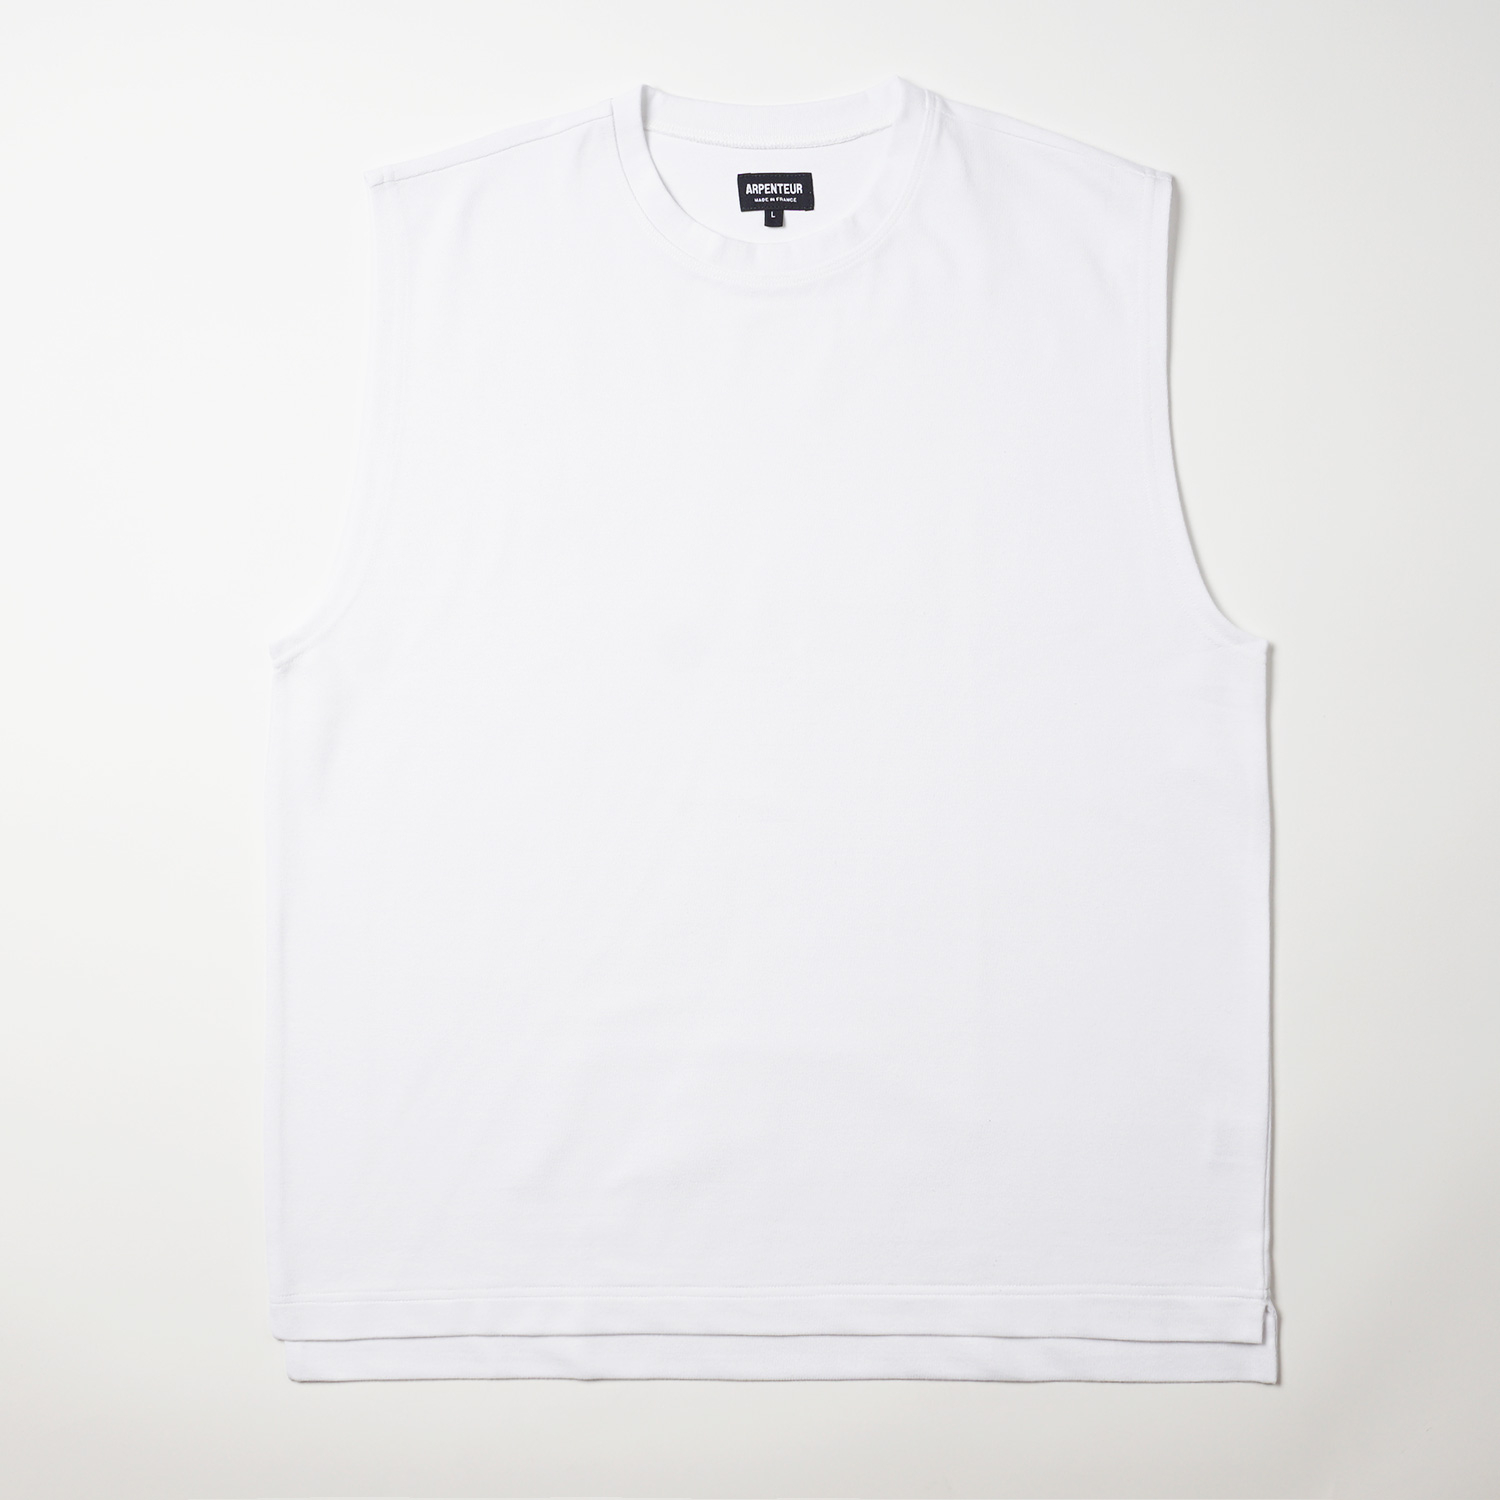 Aria t-shirt in White color by Arpenteur